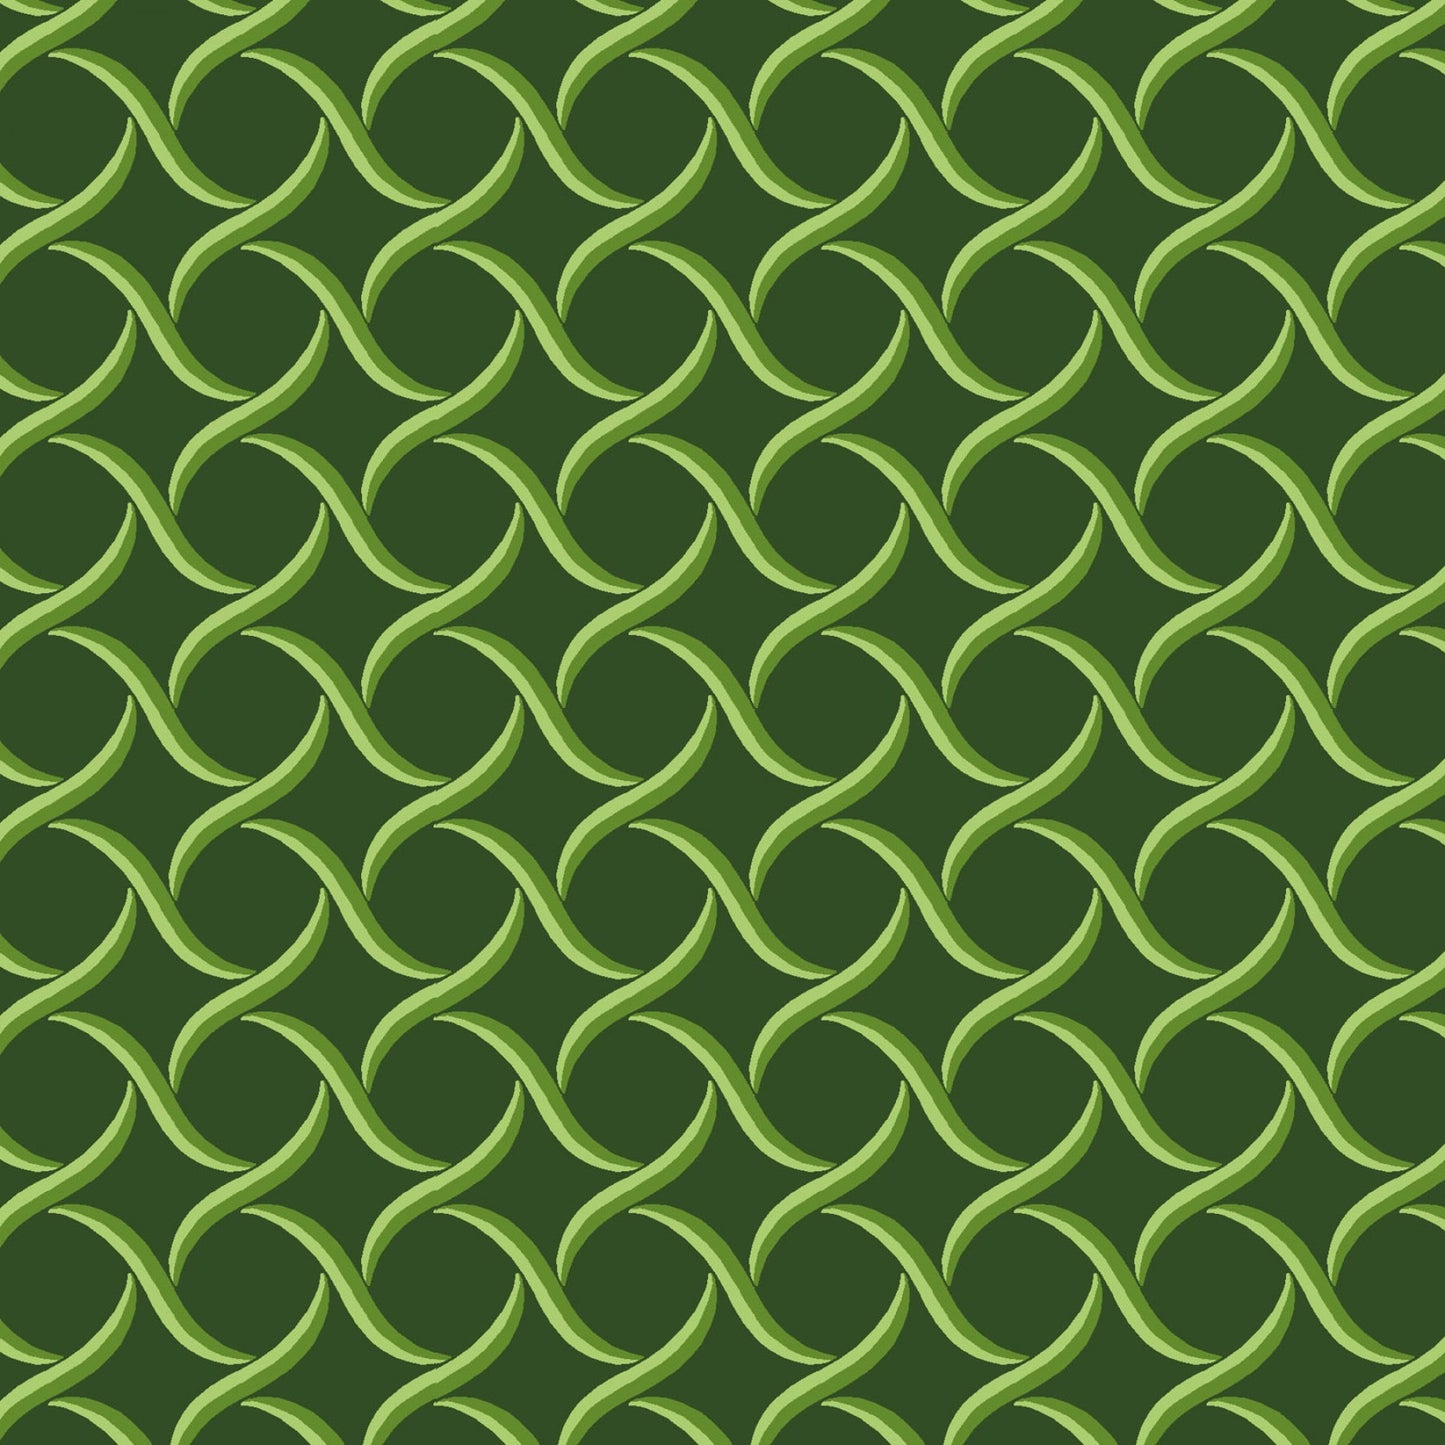 Sommersville Geometric Green on Green Cotton Quilting Fabric